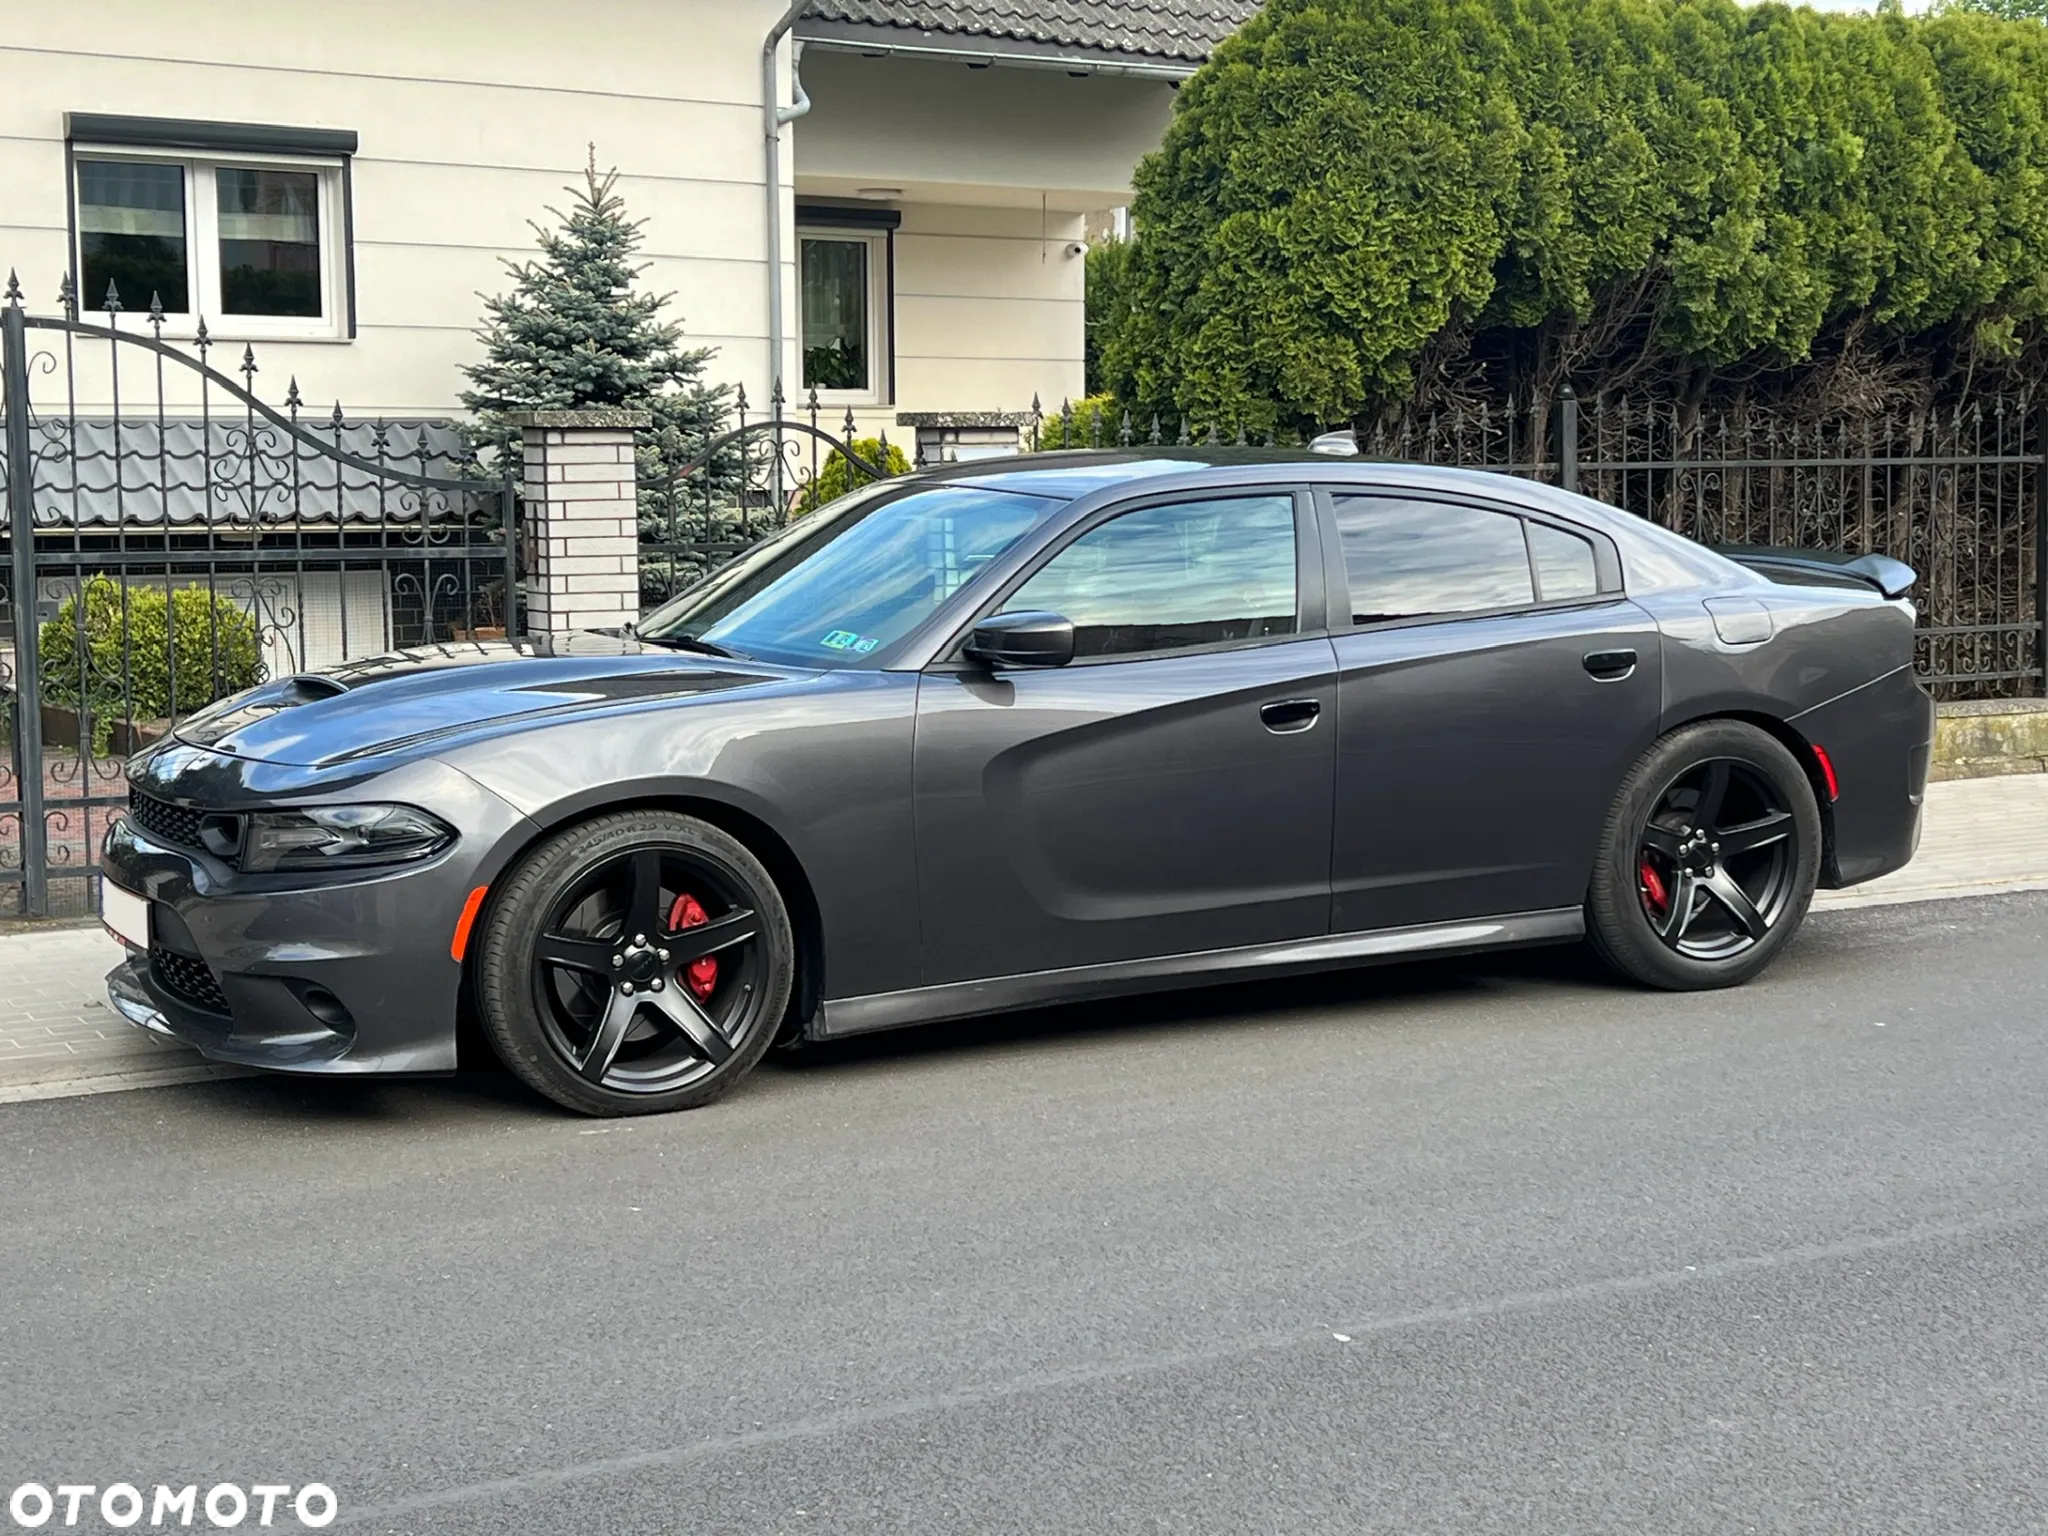 Dodge Charger 6.4 Scat Pack - 2